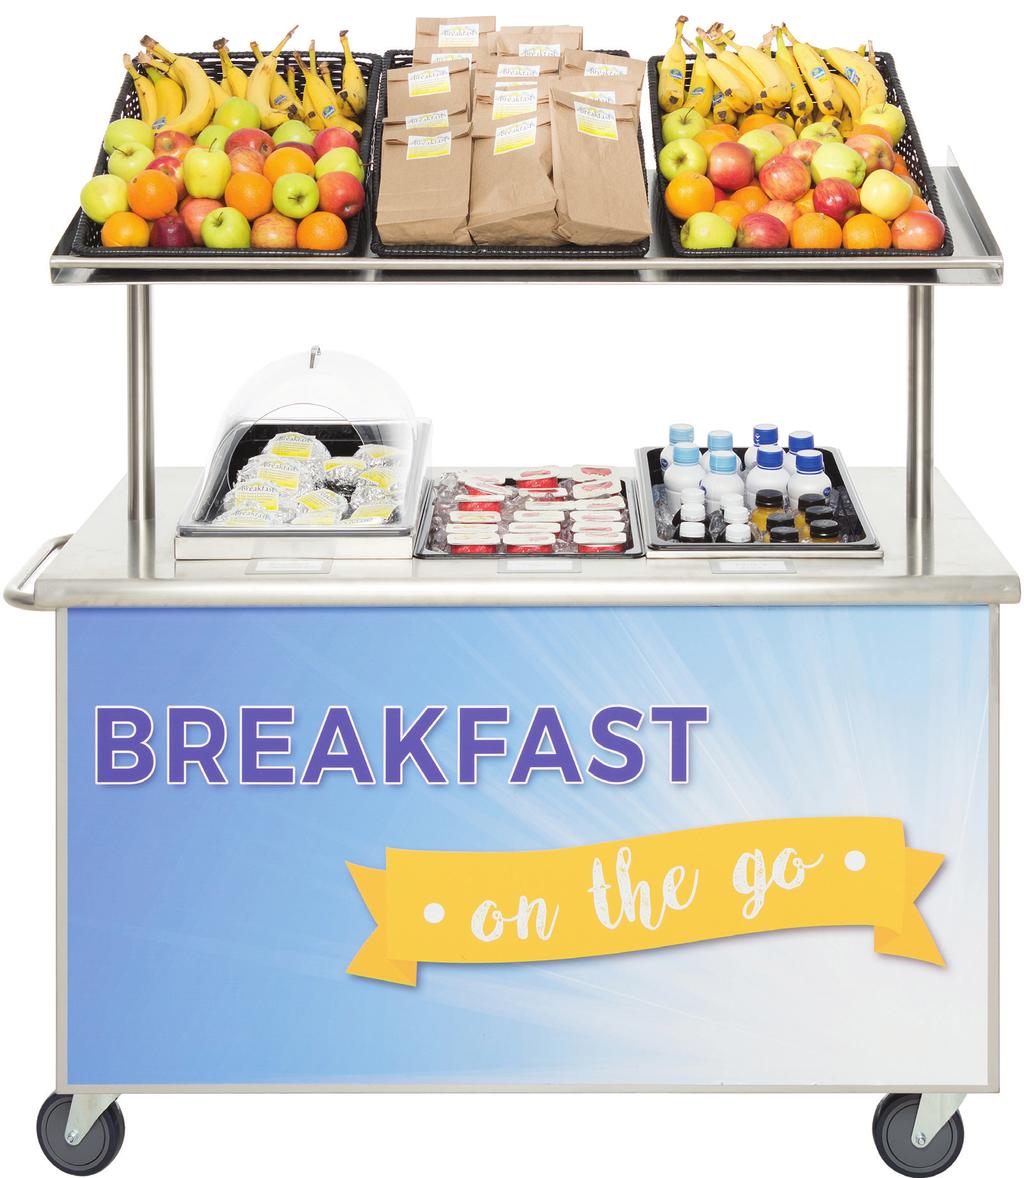 BREAKFAST $,850 (see below): $800 Side shelf included 76306 Stainless Steel Mobile Cart w/ Ice Bin and Side Shelf, 72 x 29 5/6 x 55 3/4 H 57638 Vinyl magnetic Brkfast on the Go Sign, 49 L x 26 H 435